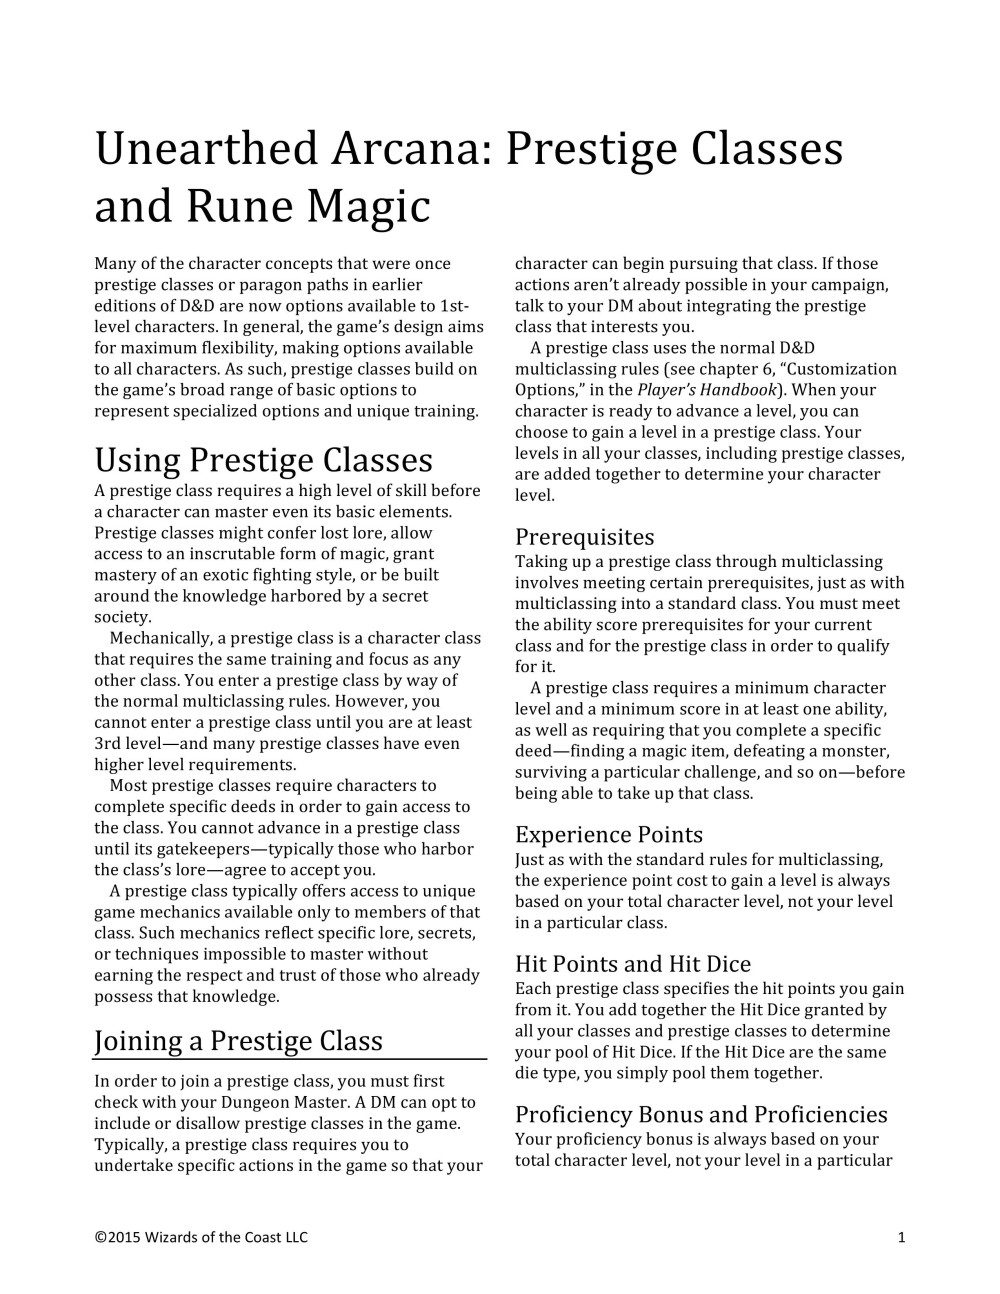 Unearthered Arcana Prestige Classes And Rune Magic Tribality